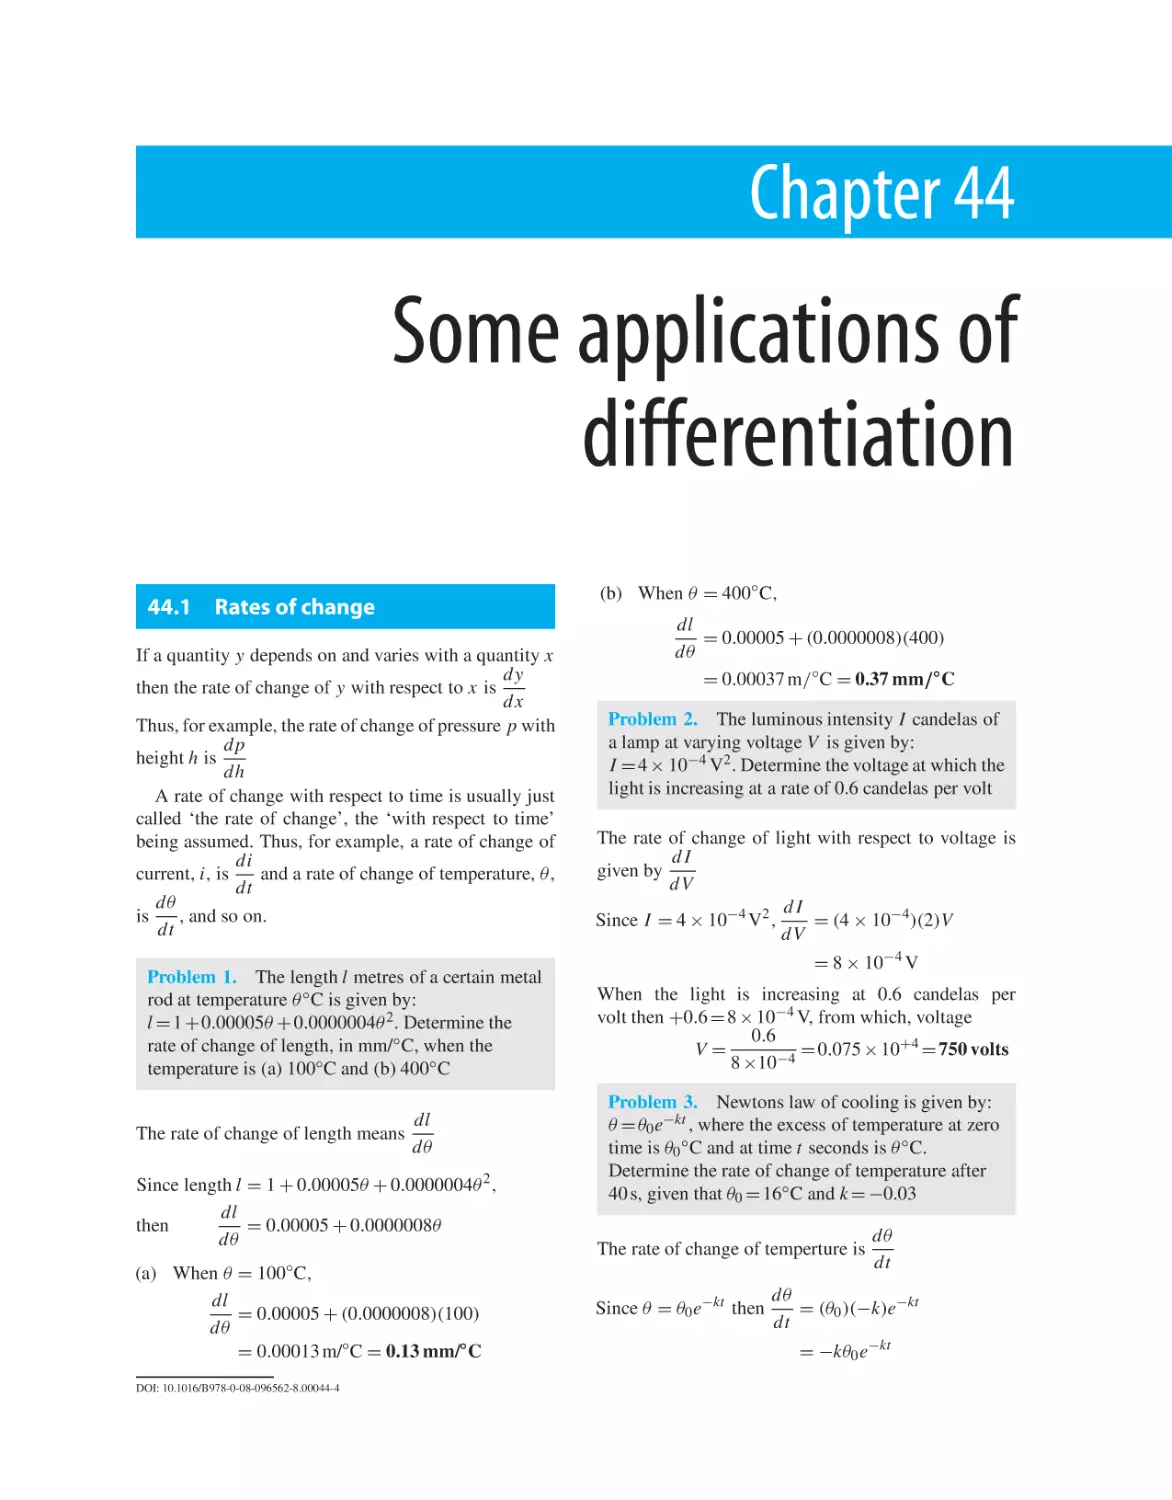 Chapter 44. Some applications of differentiation
44.1 Rates of change